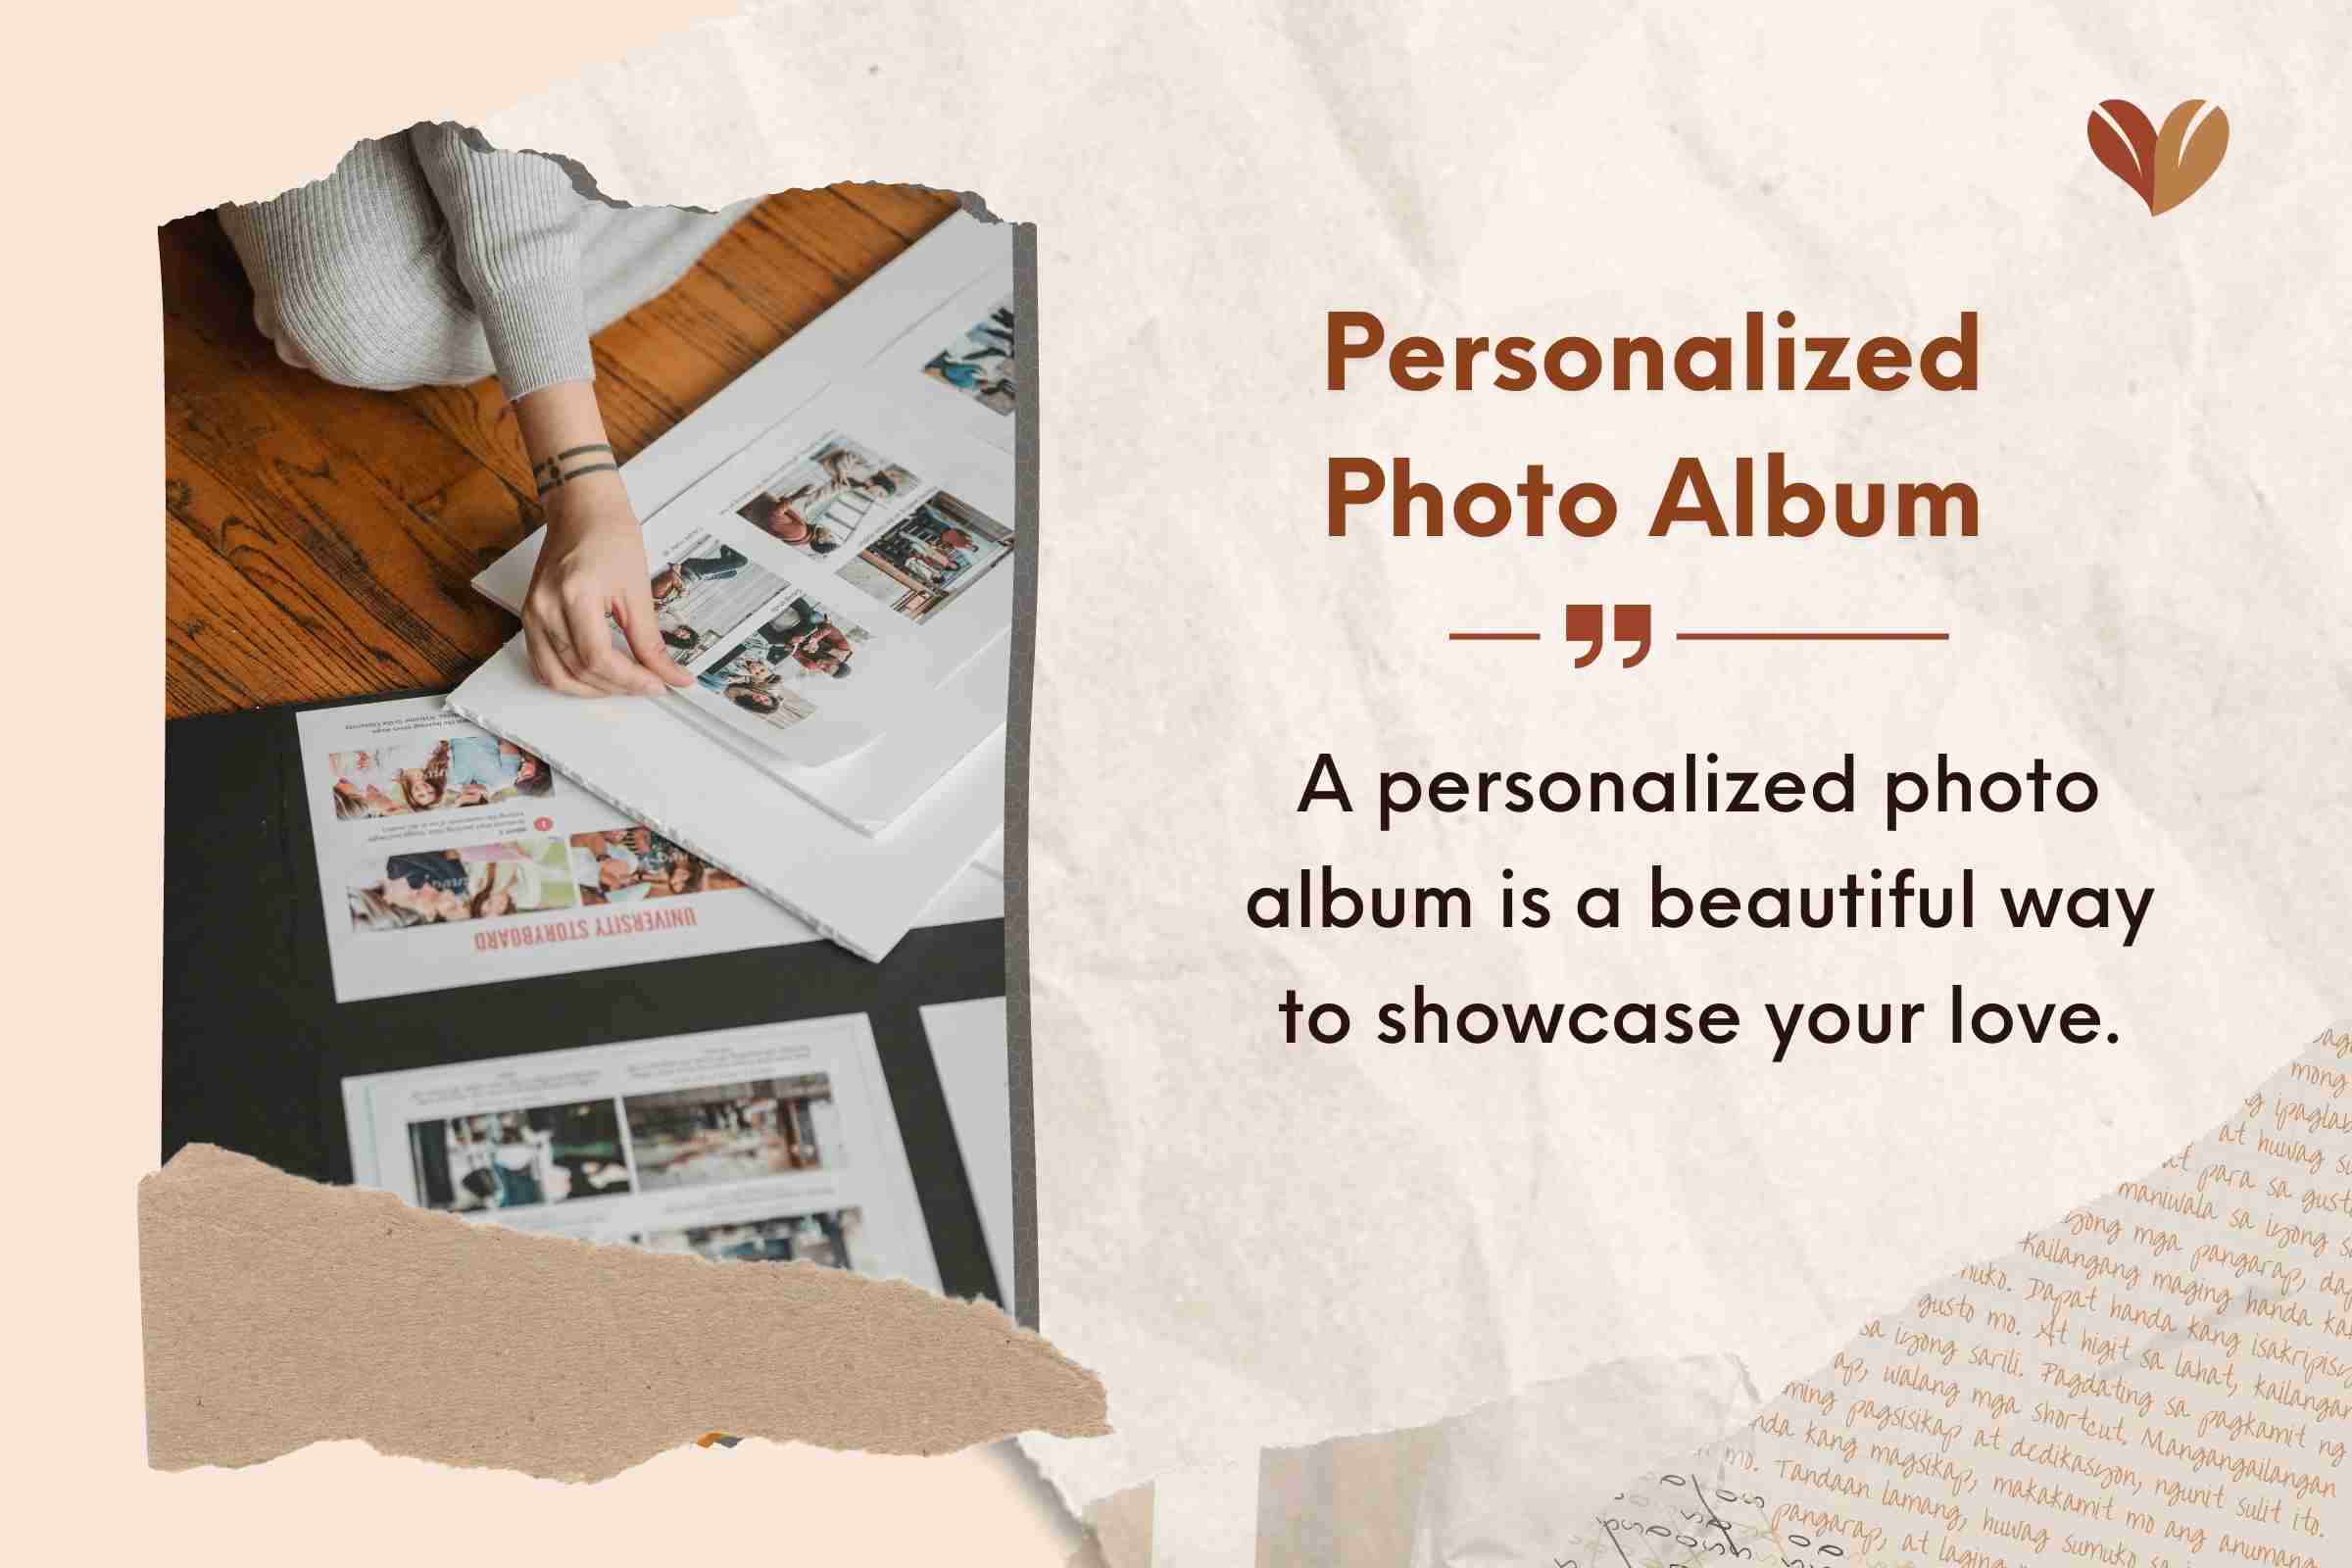 Personalized photo album for 3rd-anniversary gifts.